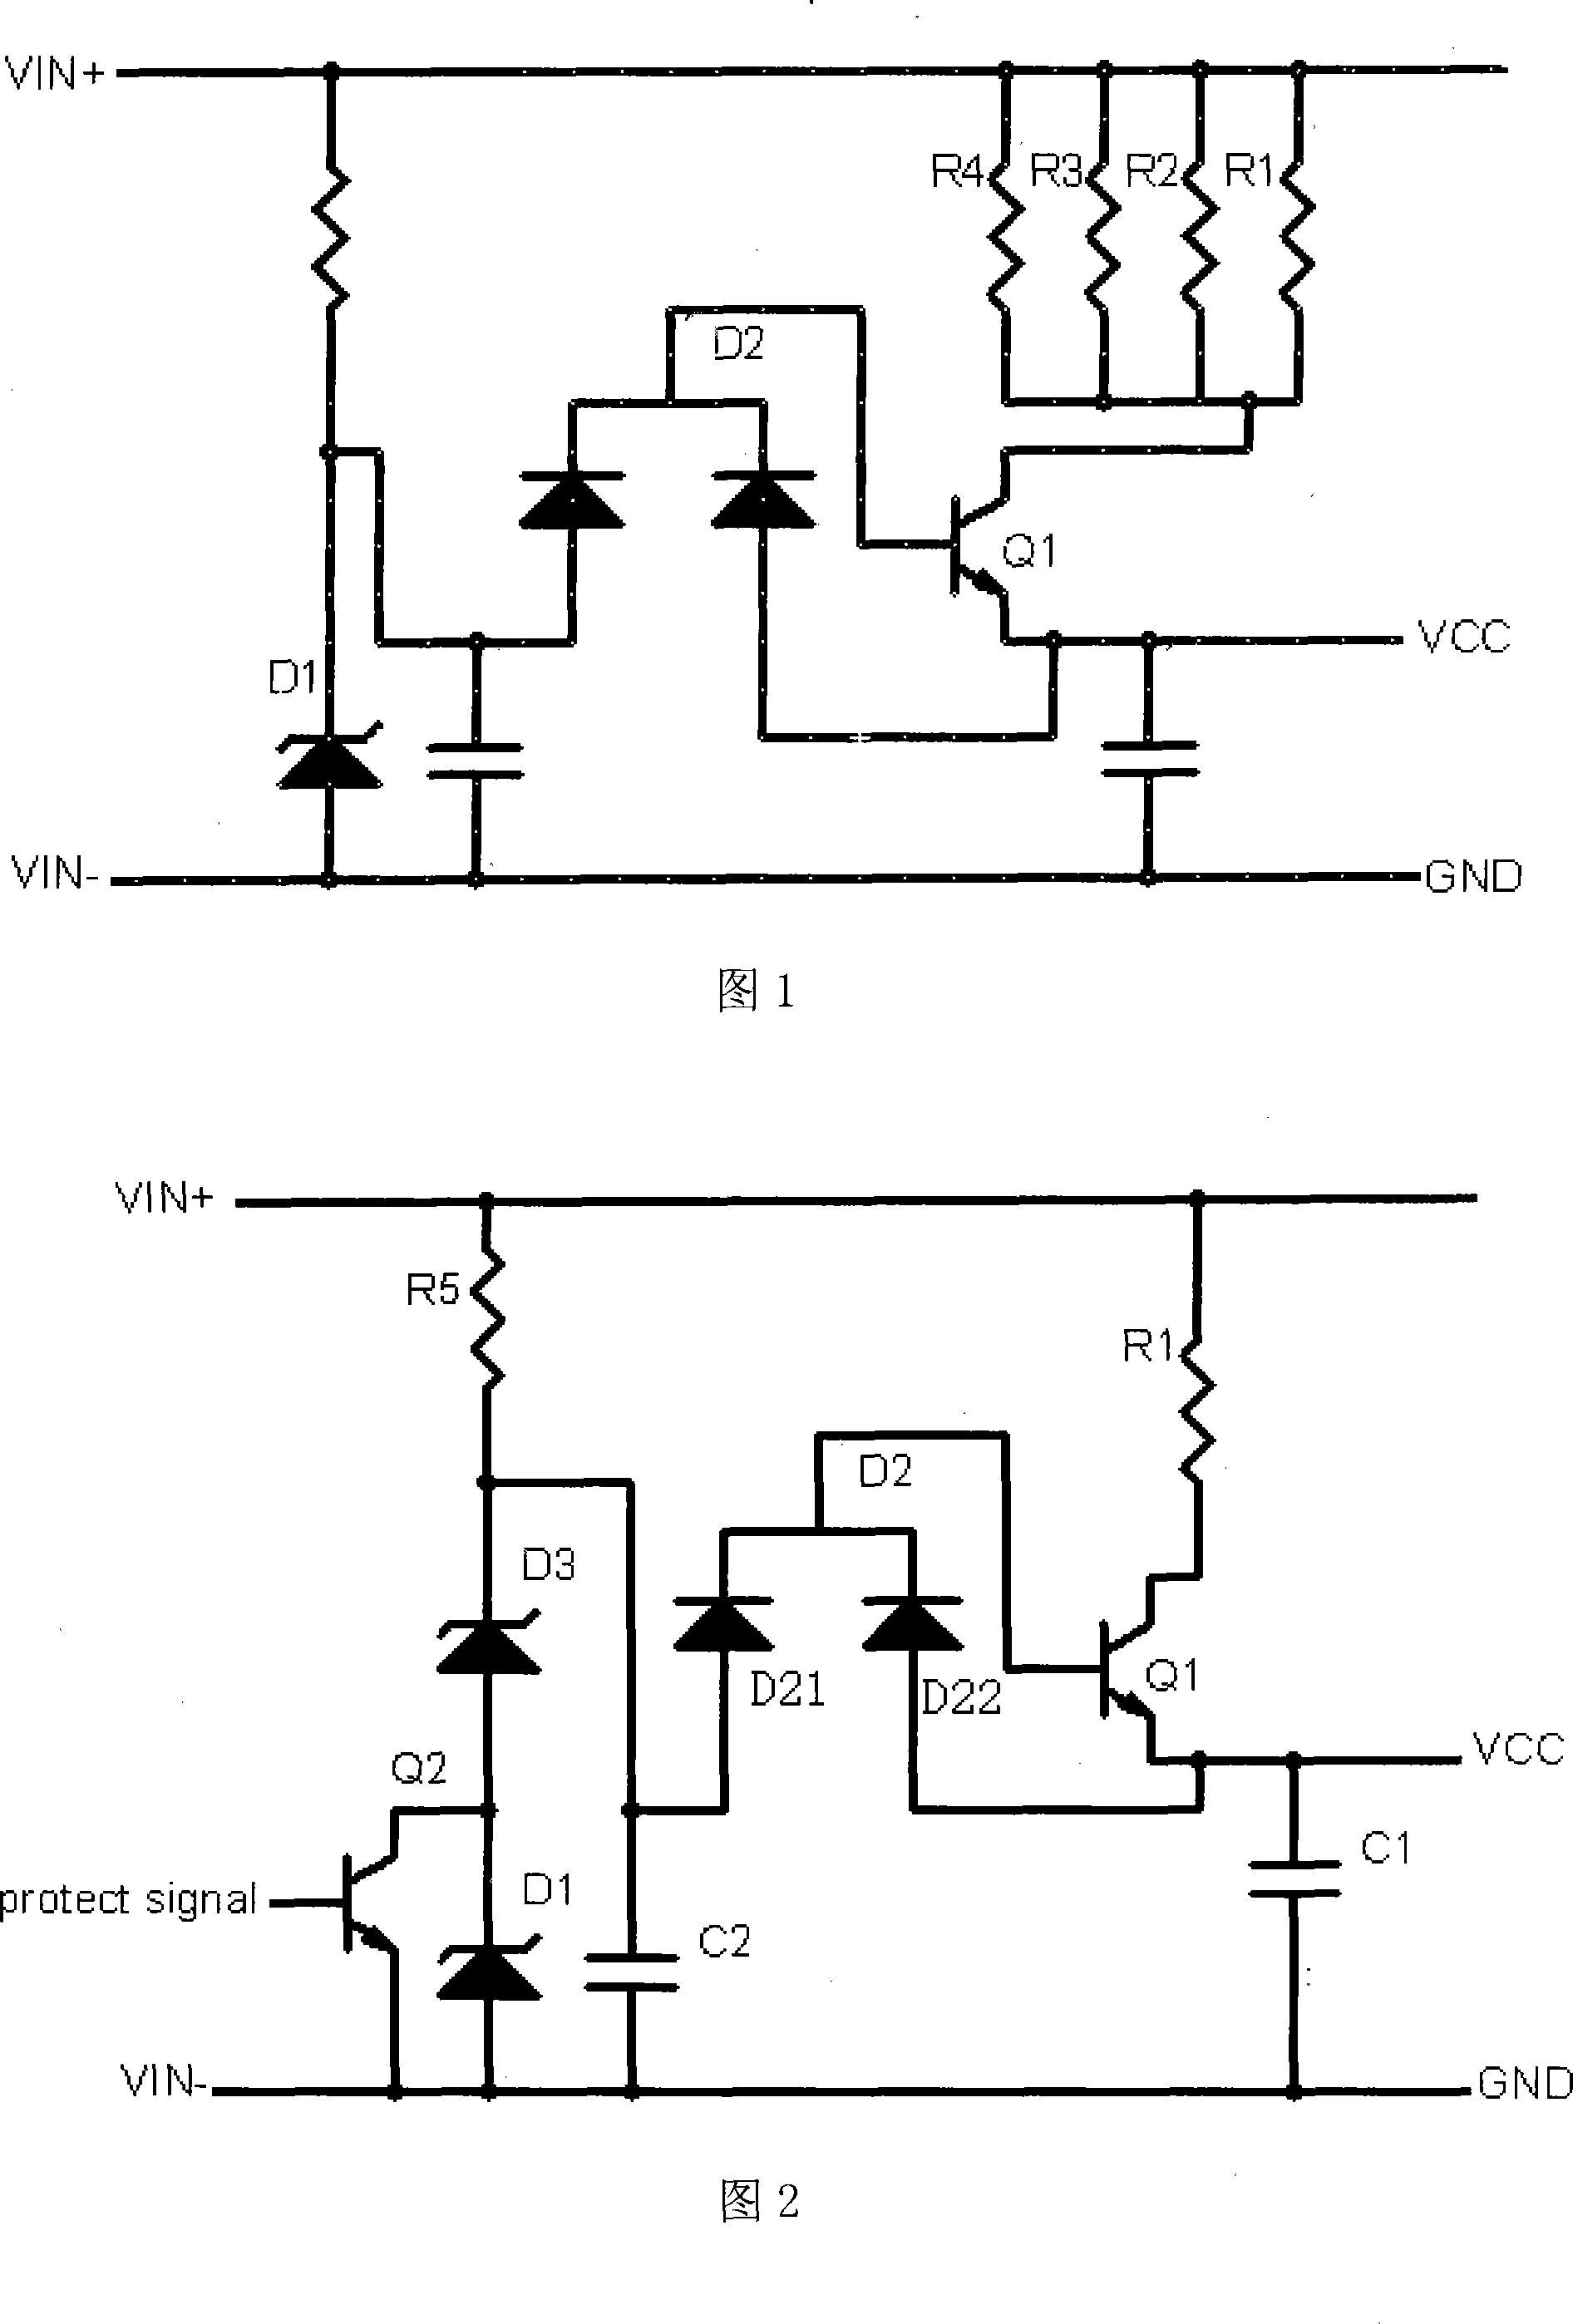 A startup auxiliary power circuit